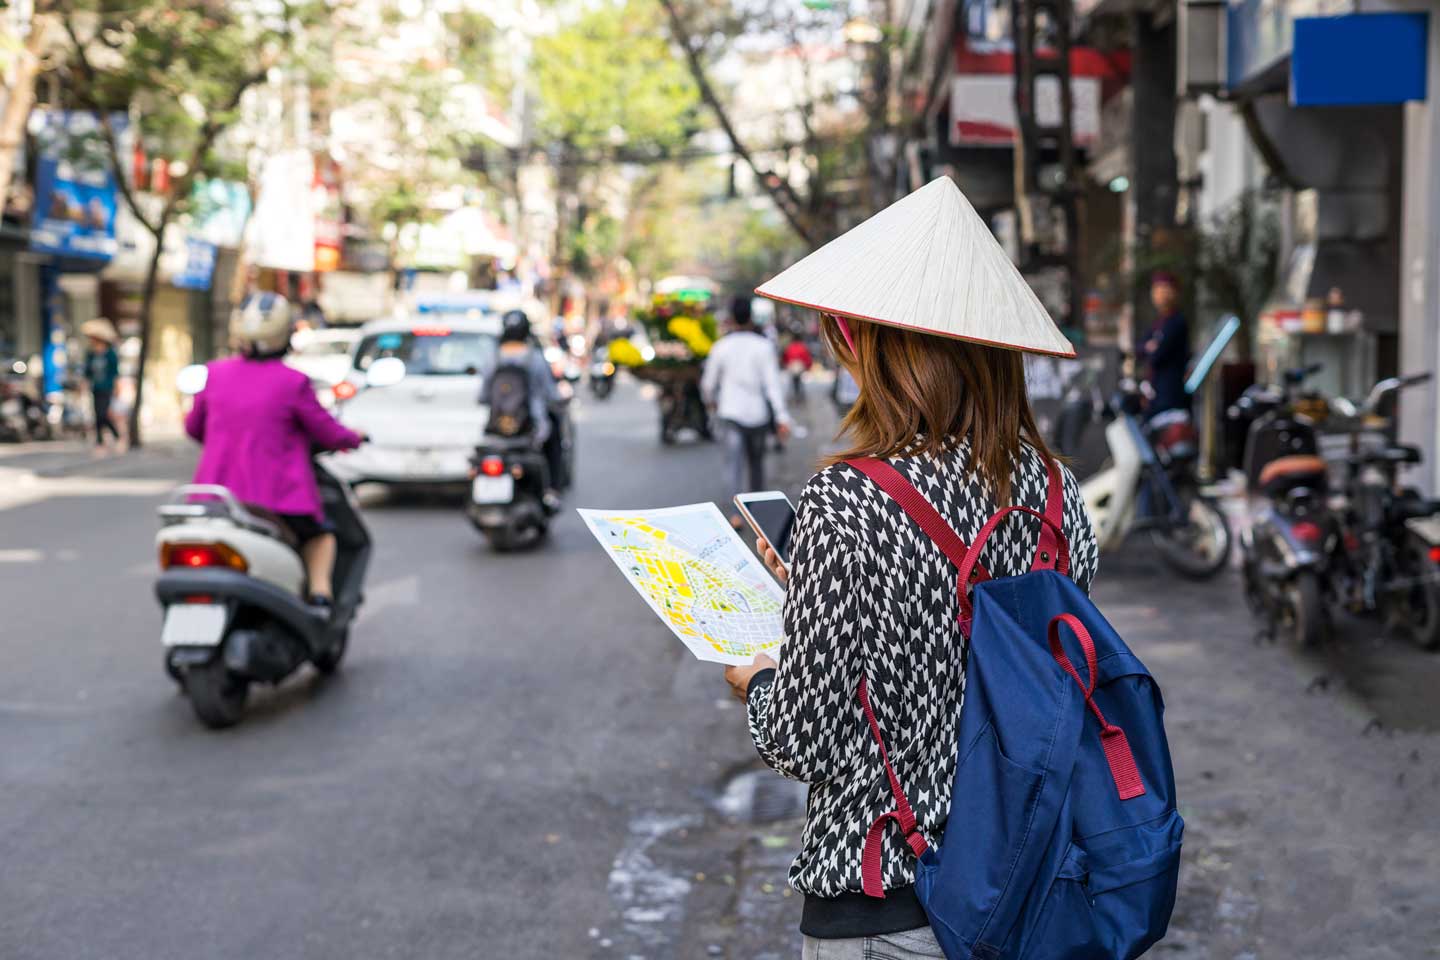 13 interesting facts you should know for Vietnam travel